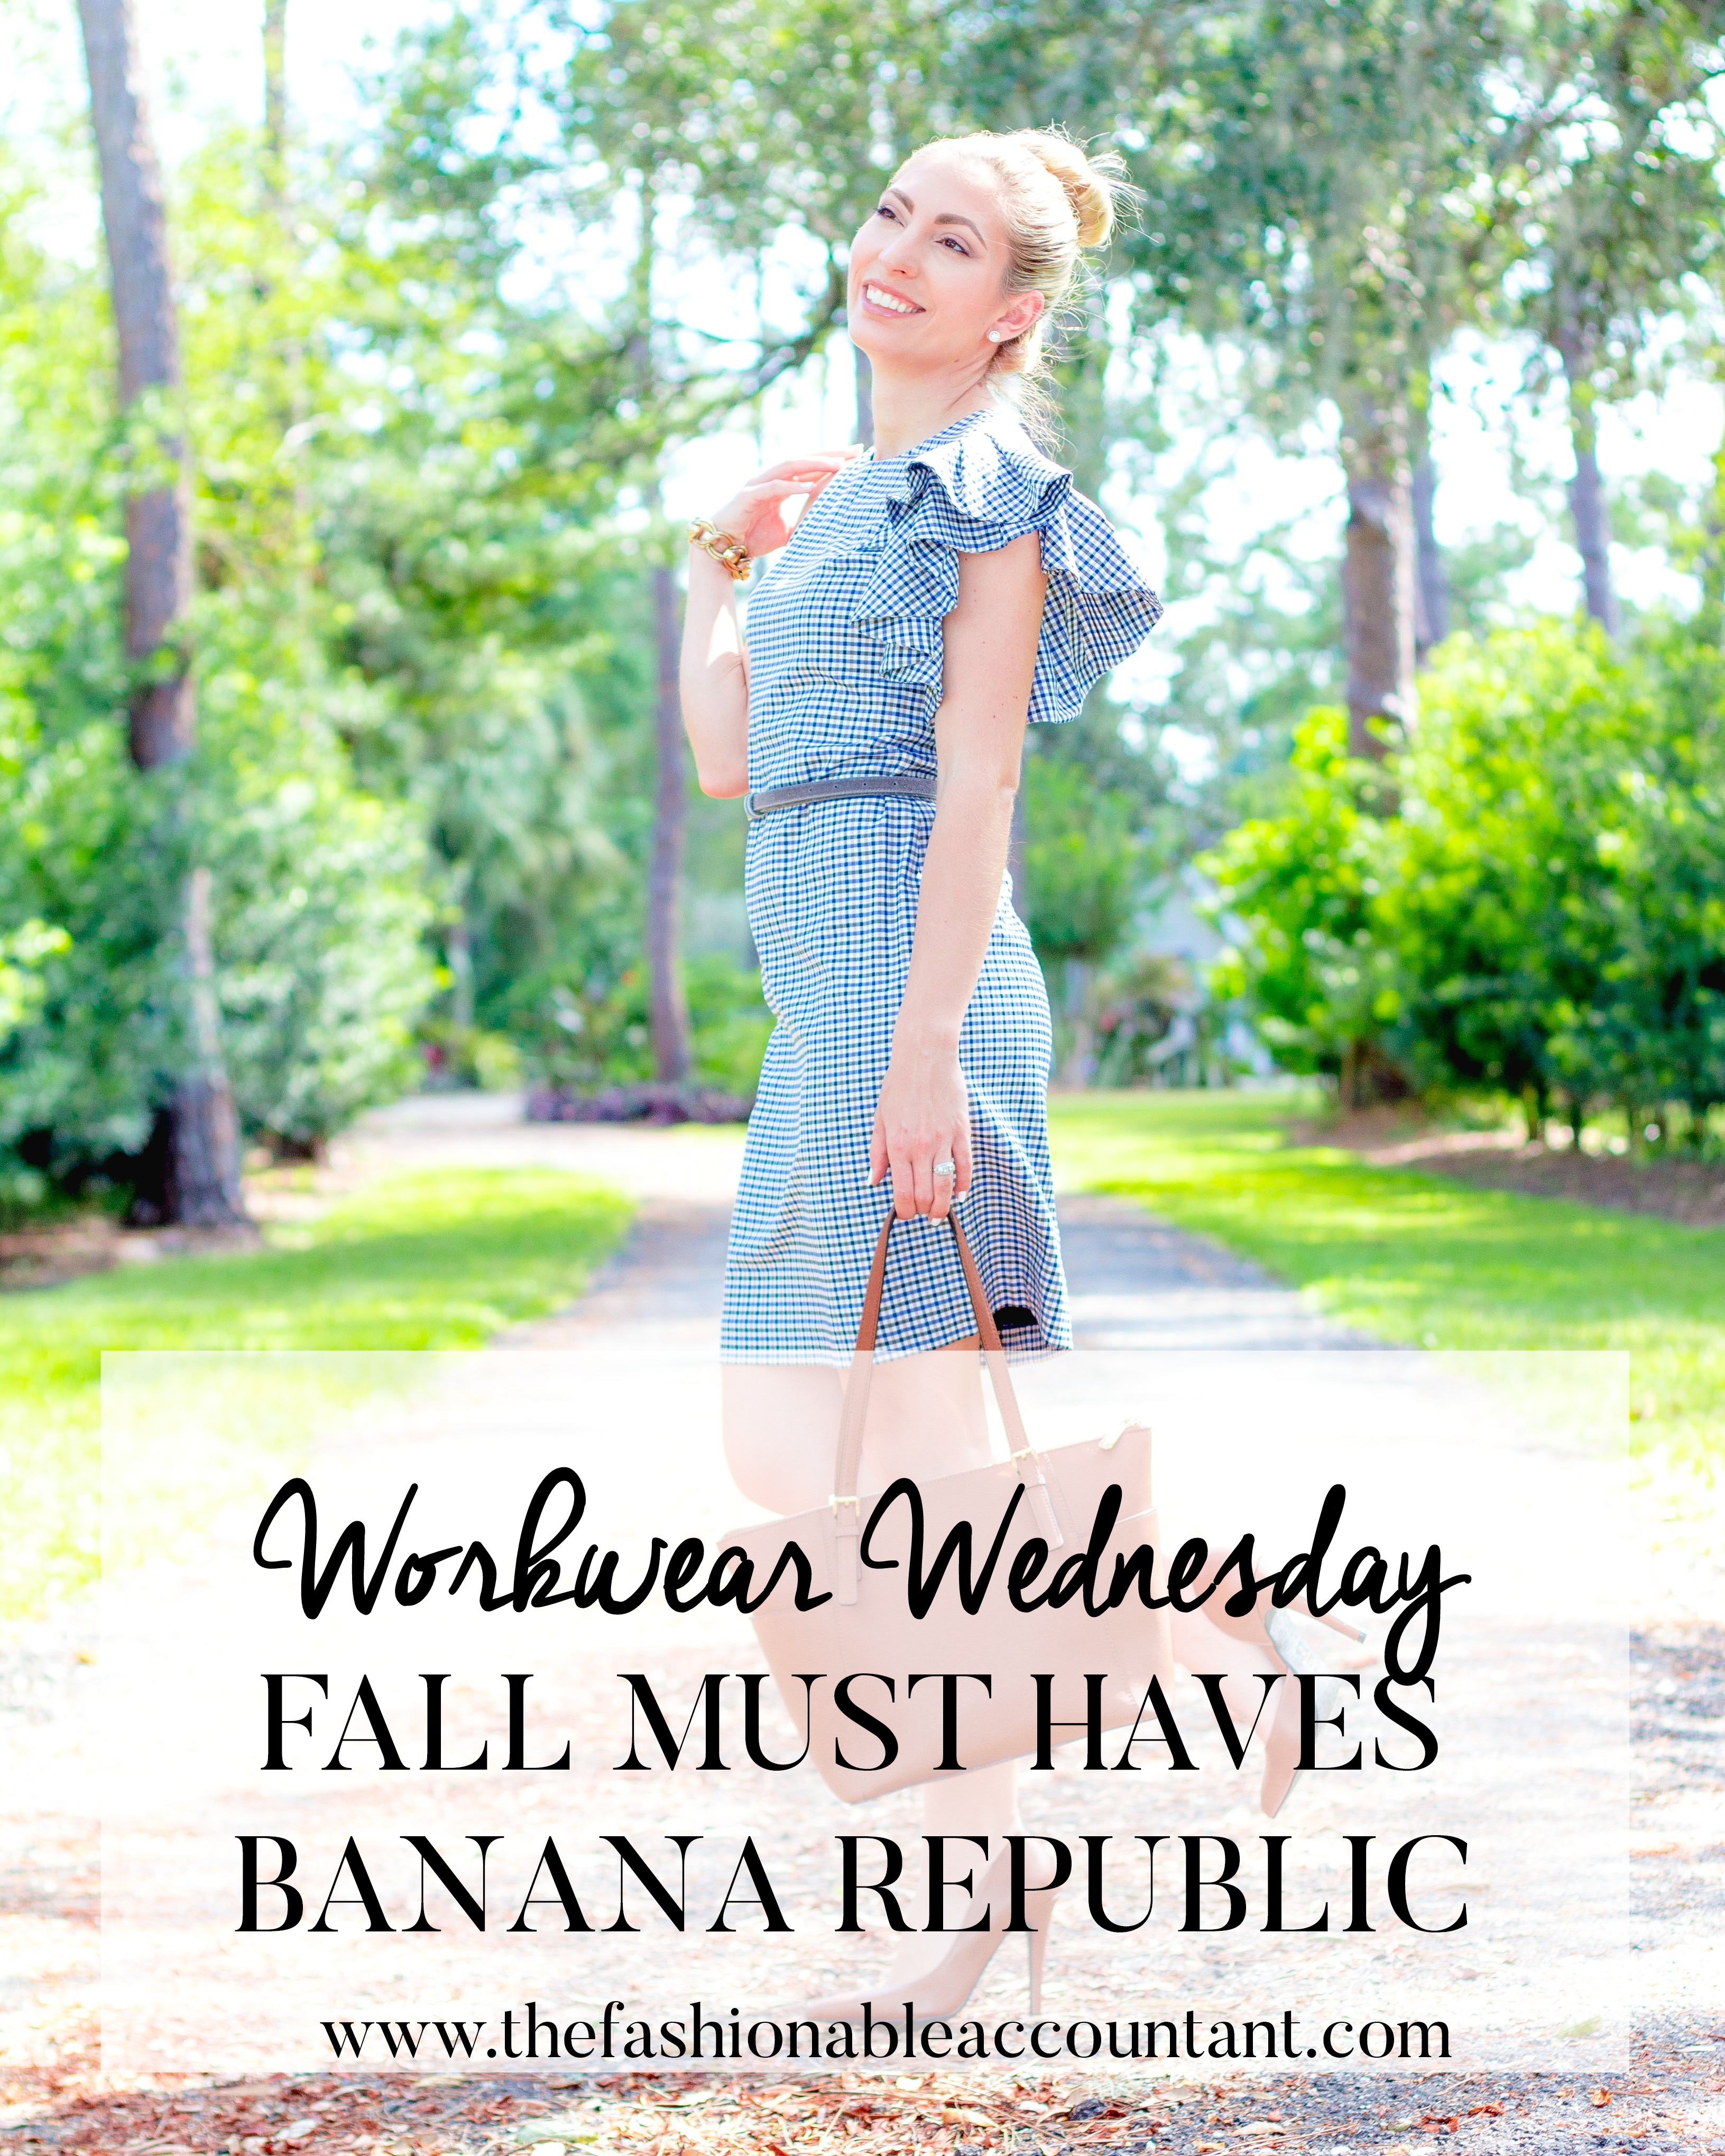 WORKWEAR WEDNESDAY - FALL MUST HAVES BANANA REPUBLIC